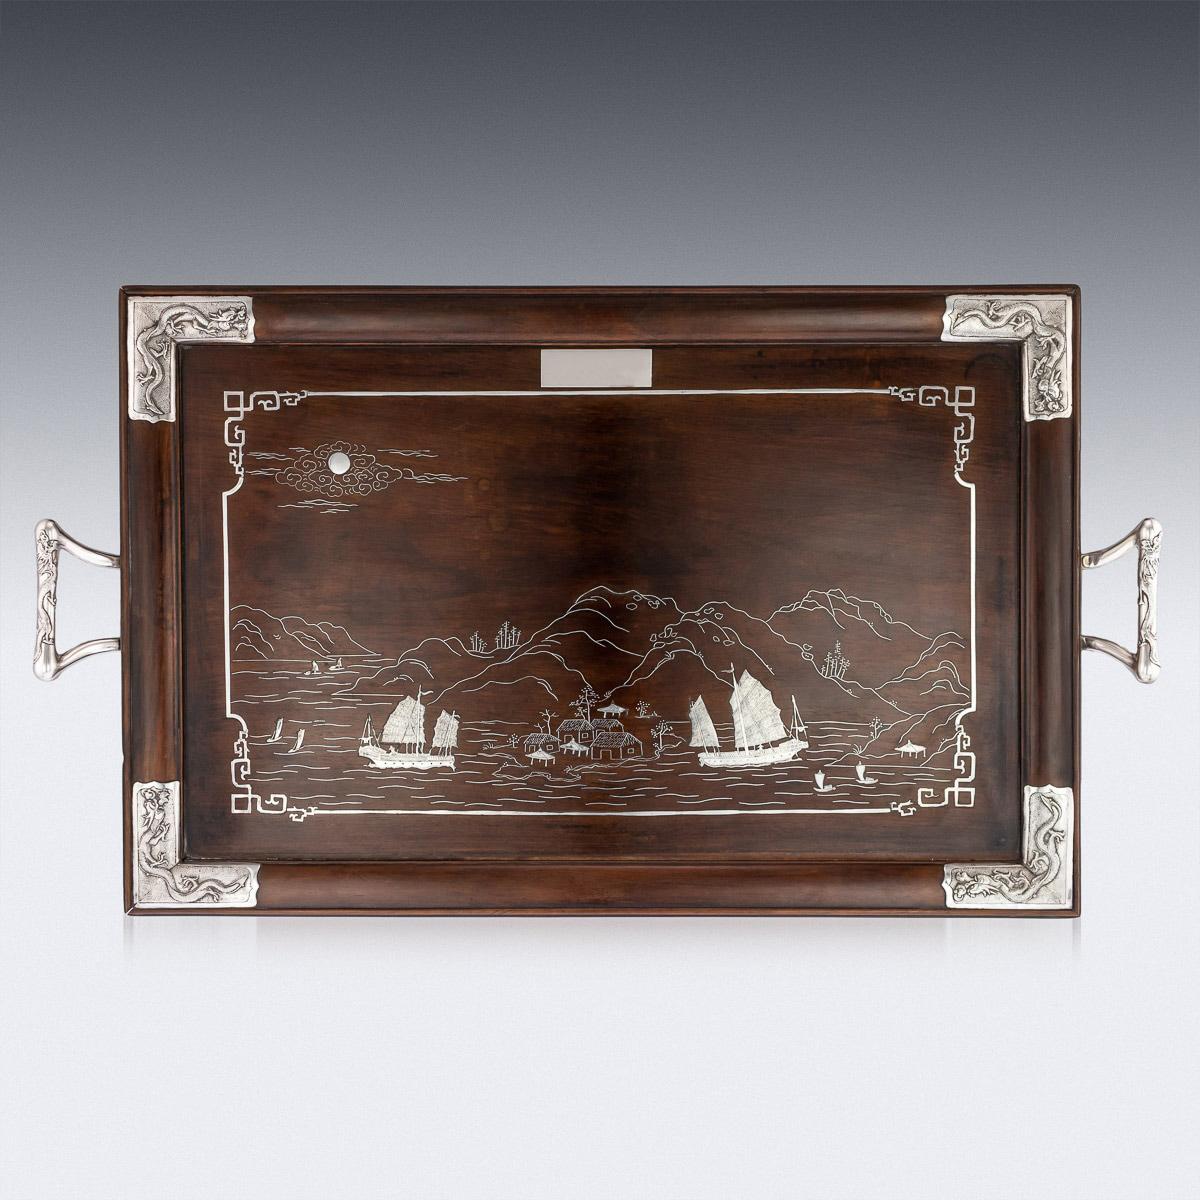 Antique early 20th century rare Chinese export solid silver impressively large, detachable tea tray on a folding table, handles and corner plaques embossed with a dragon design on matted ground. Mounted on a large rosewood serving tray, of